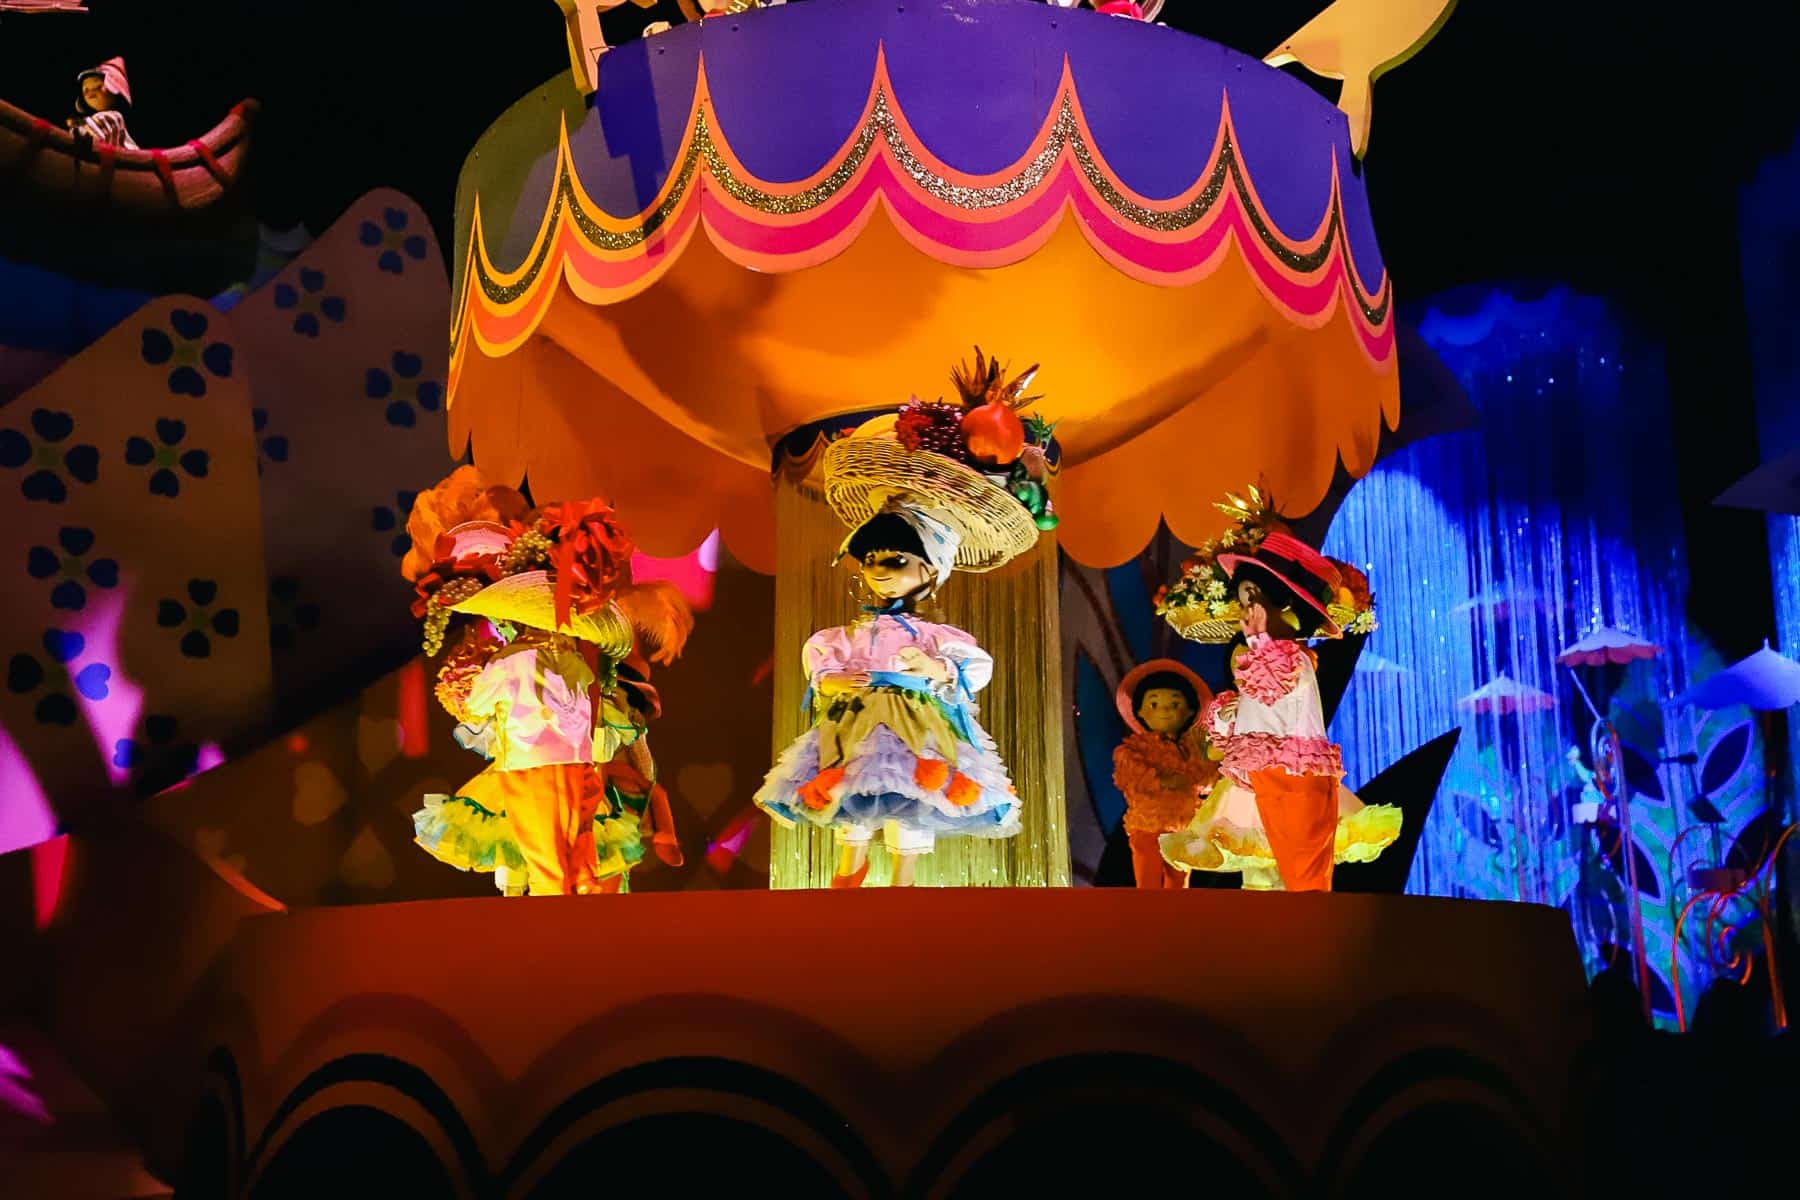 "it's a small world" dancers 